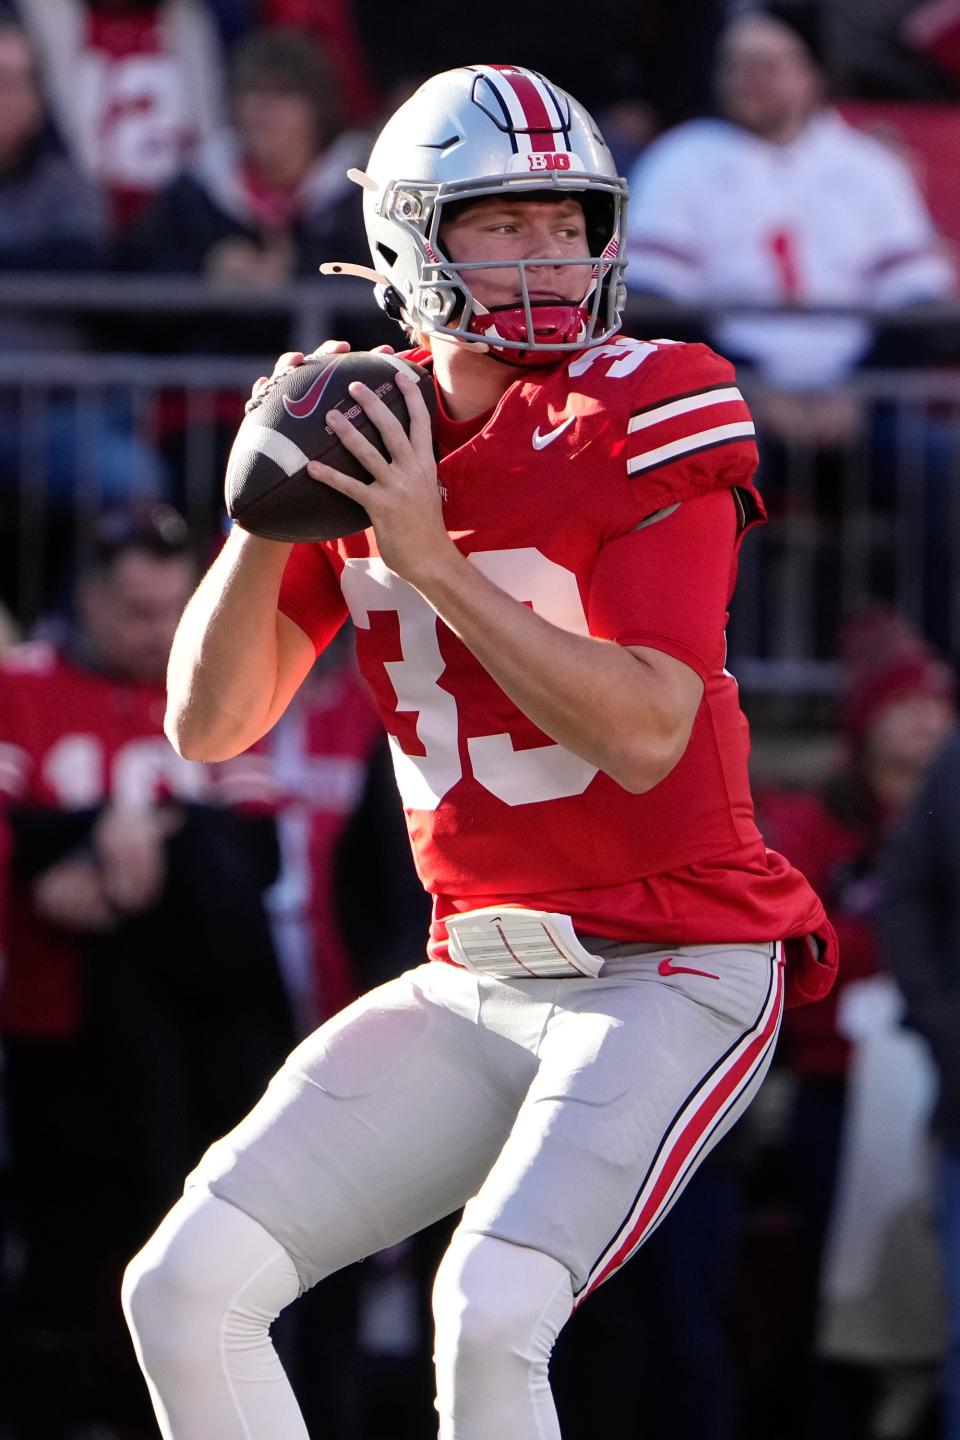 Ohio State quarterback Devin Brown was 12-for-22 passing during the regular season for 197 yards two touchdowns and an interception.